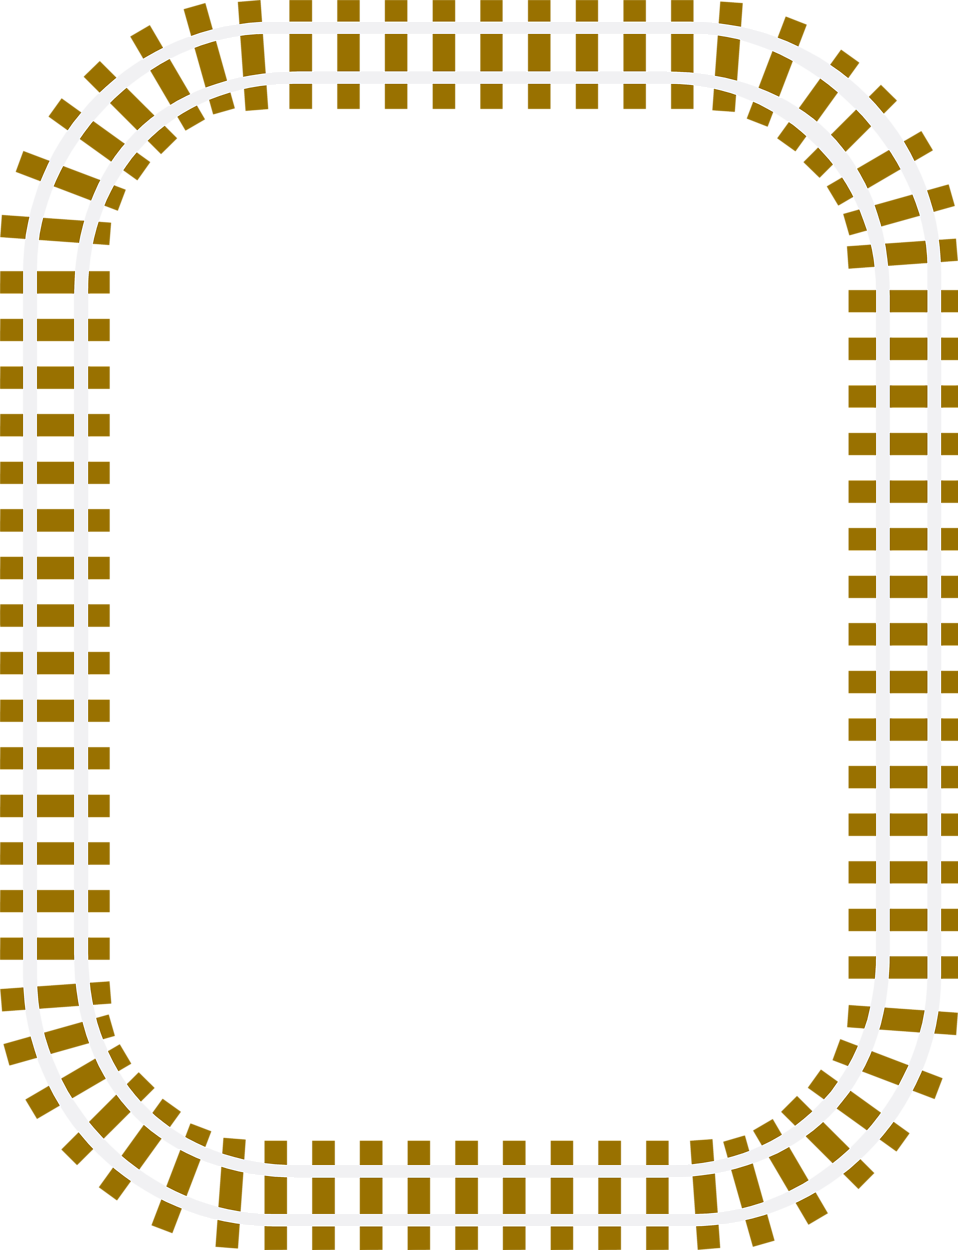 Clipart road border. Illustration of a blank